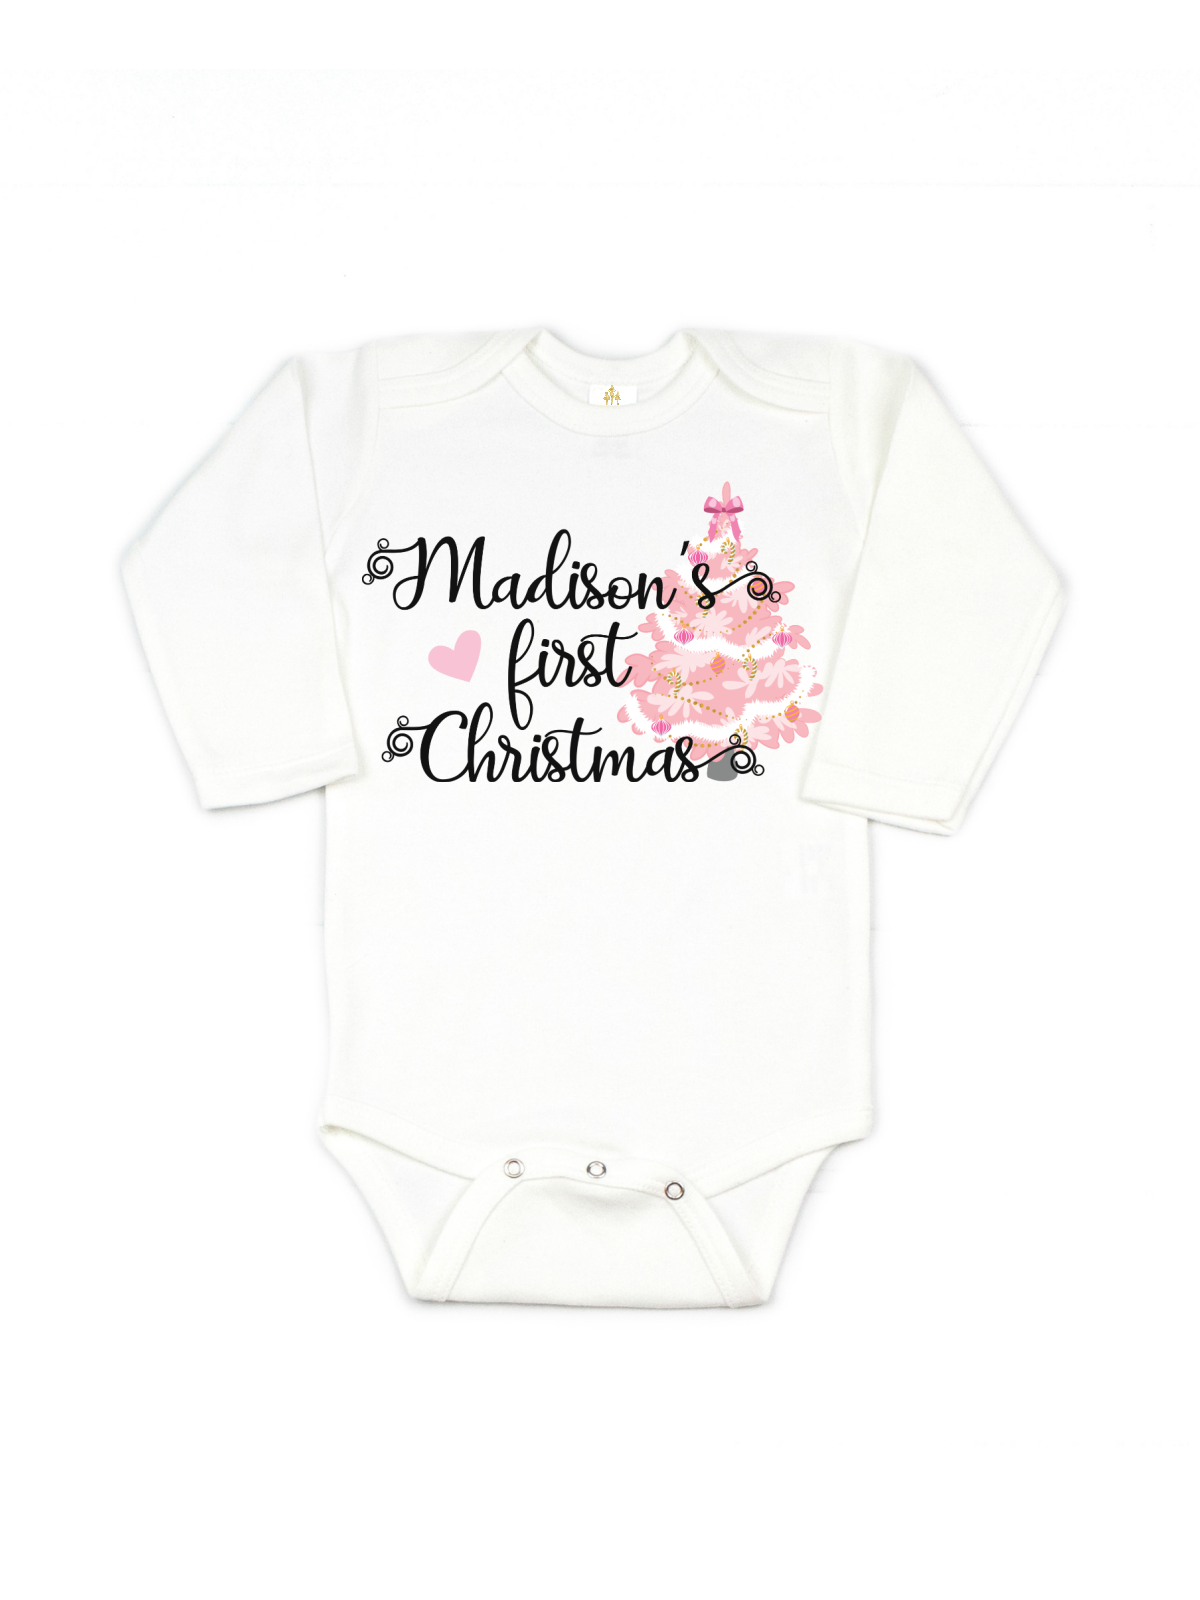 custom baby girl's first pink Christmas one piece